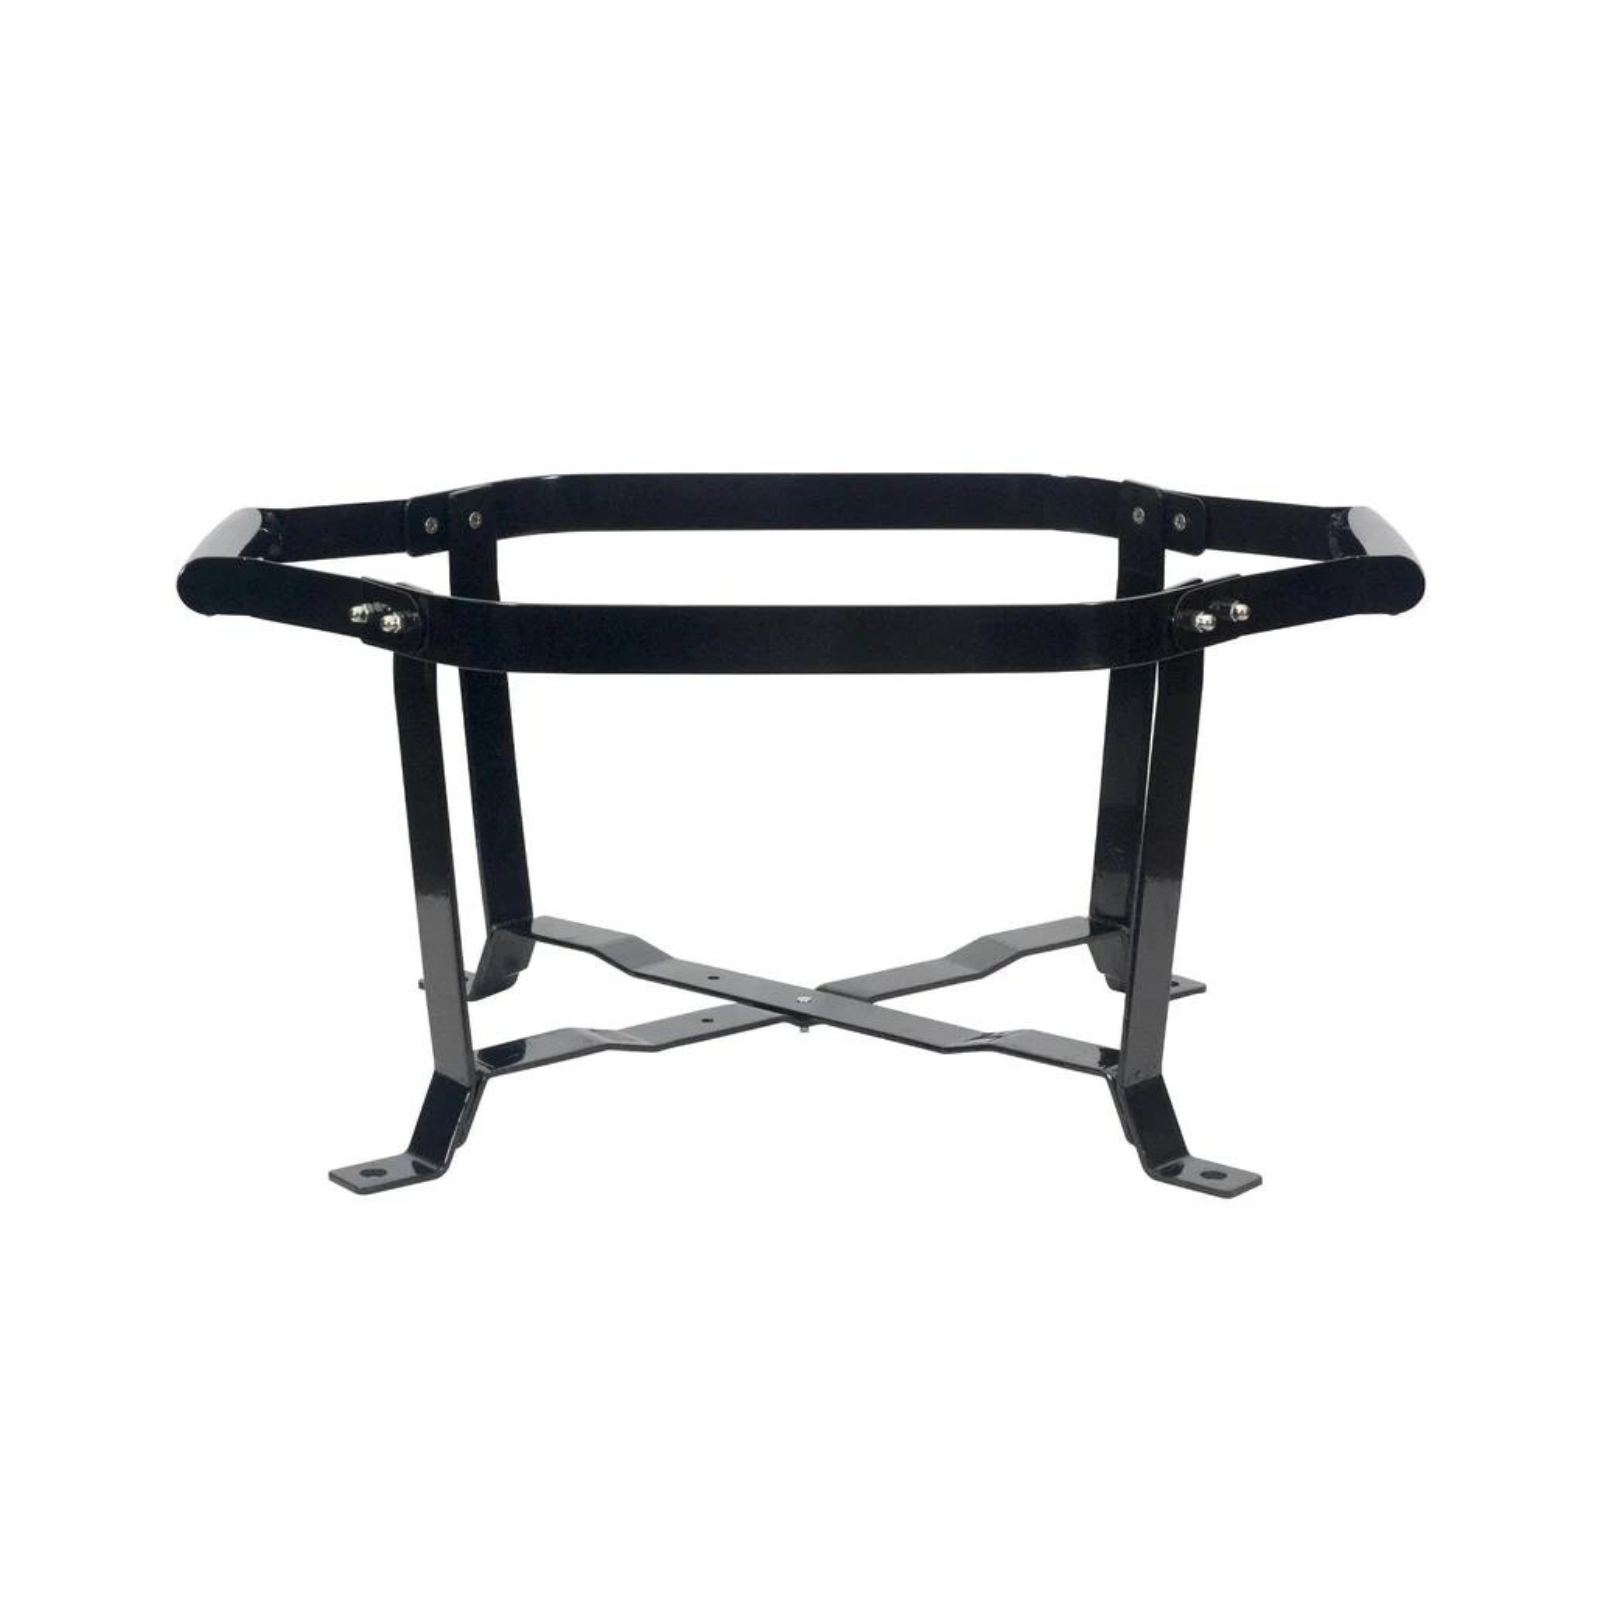 Primo GO Cradle - for Oval JR Charcoal Grill - PG00321